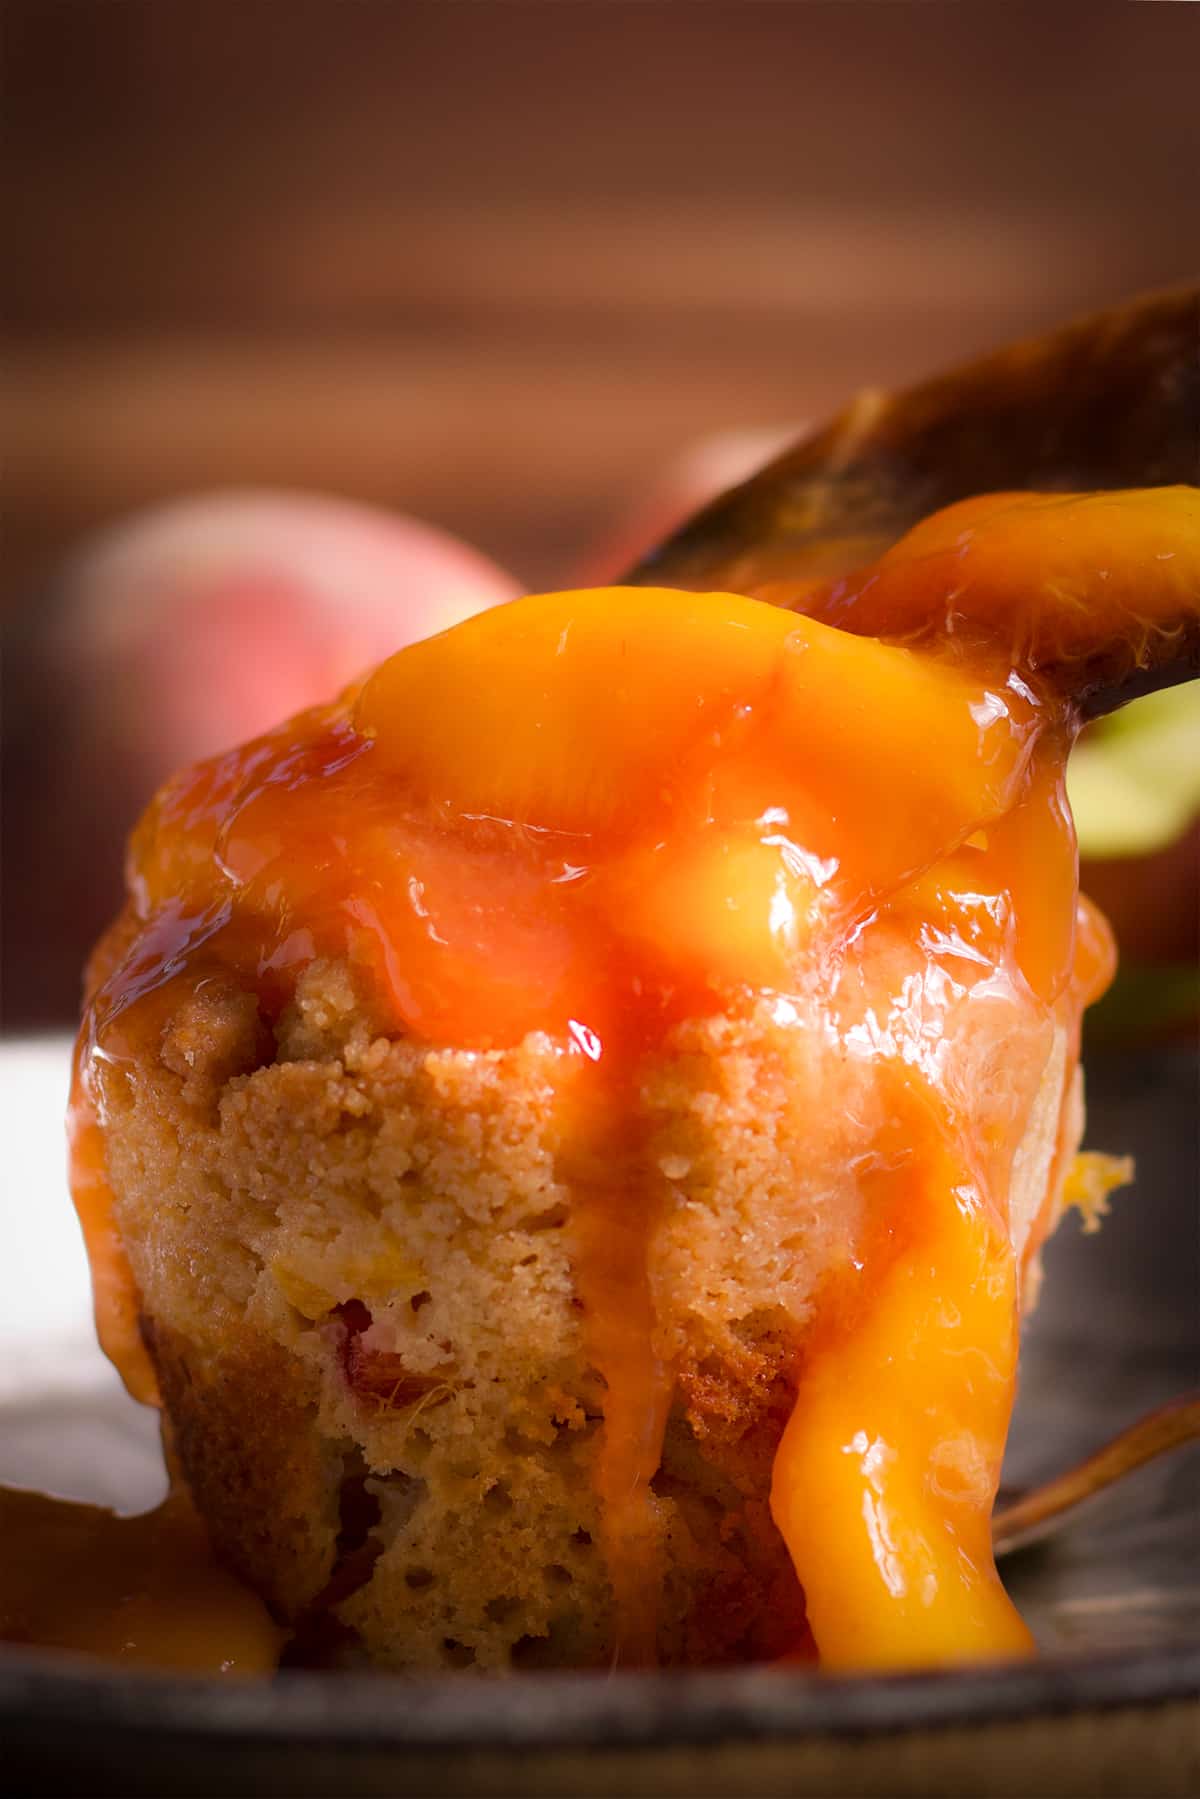 Someone spooning peach sauce over the top of a peach cobbler muffin.